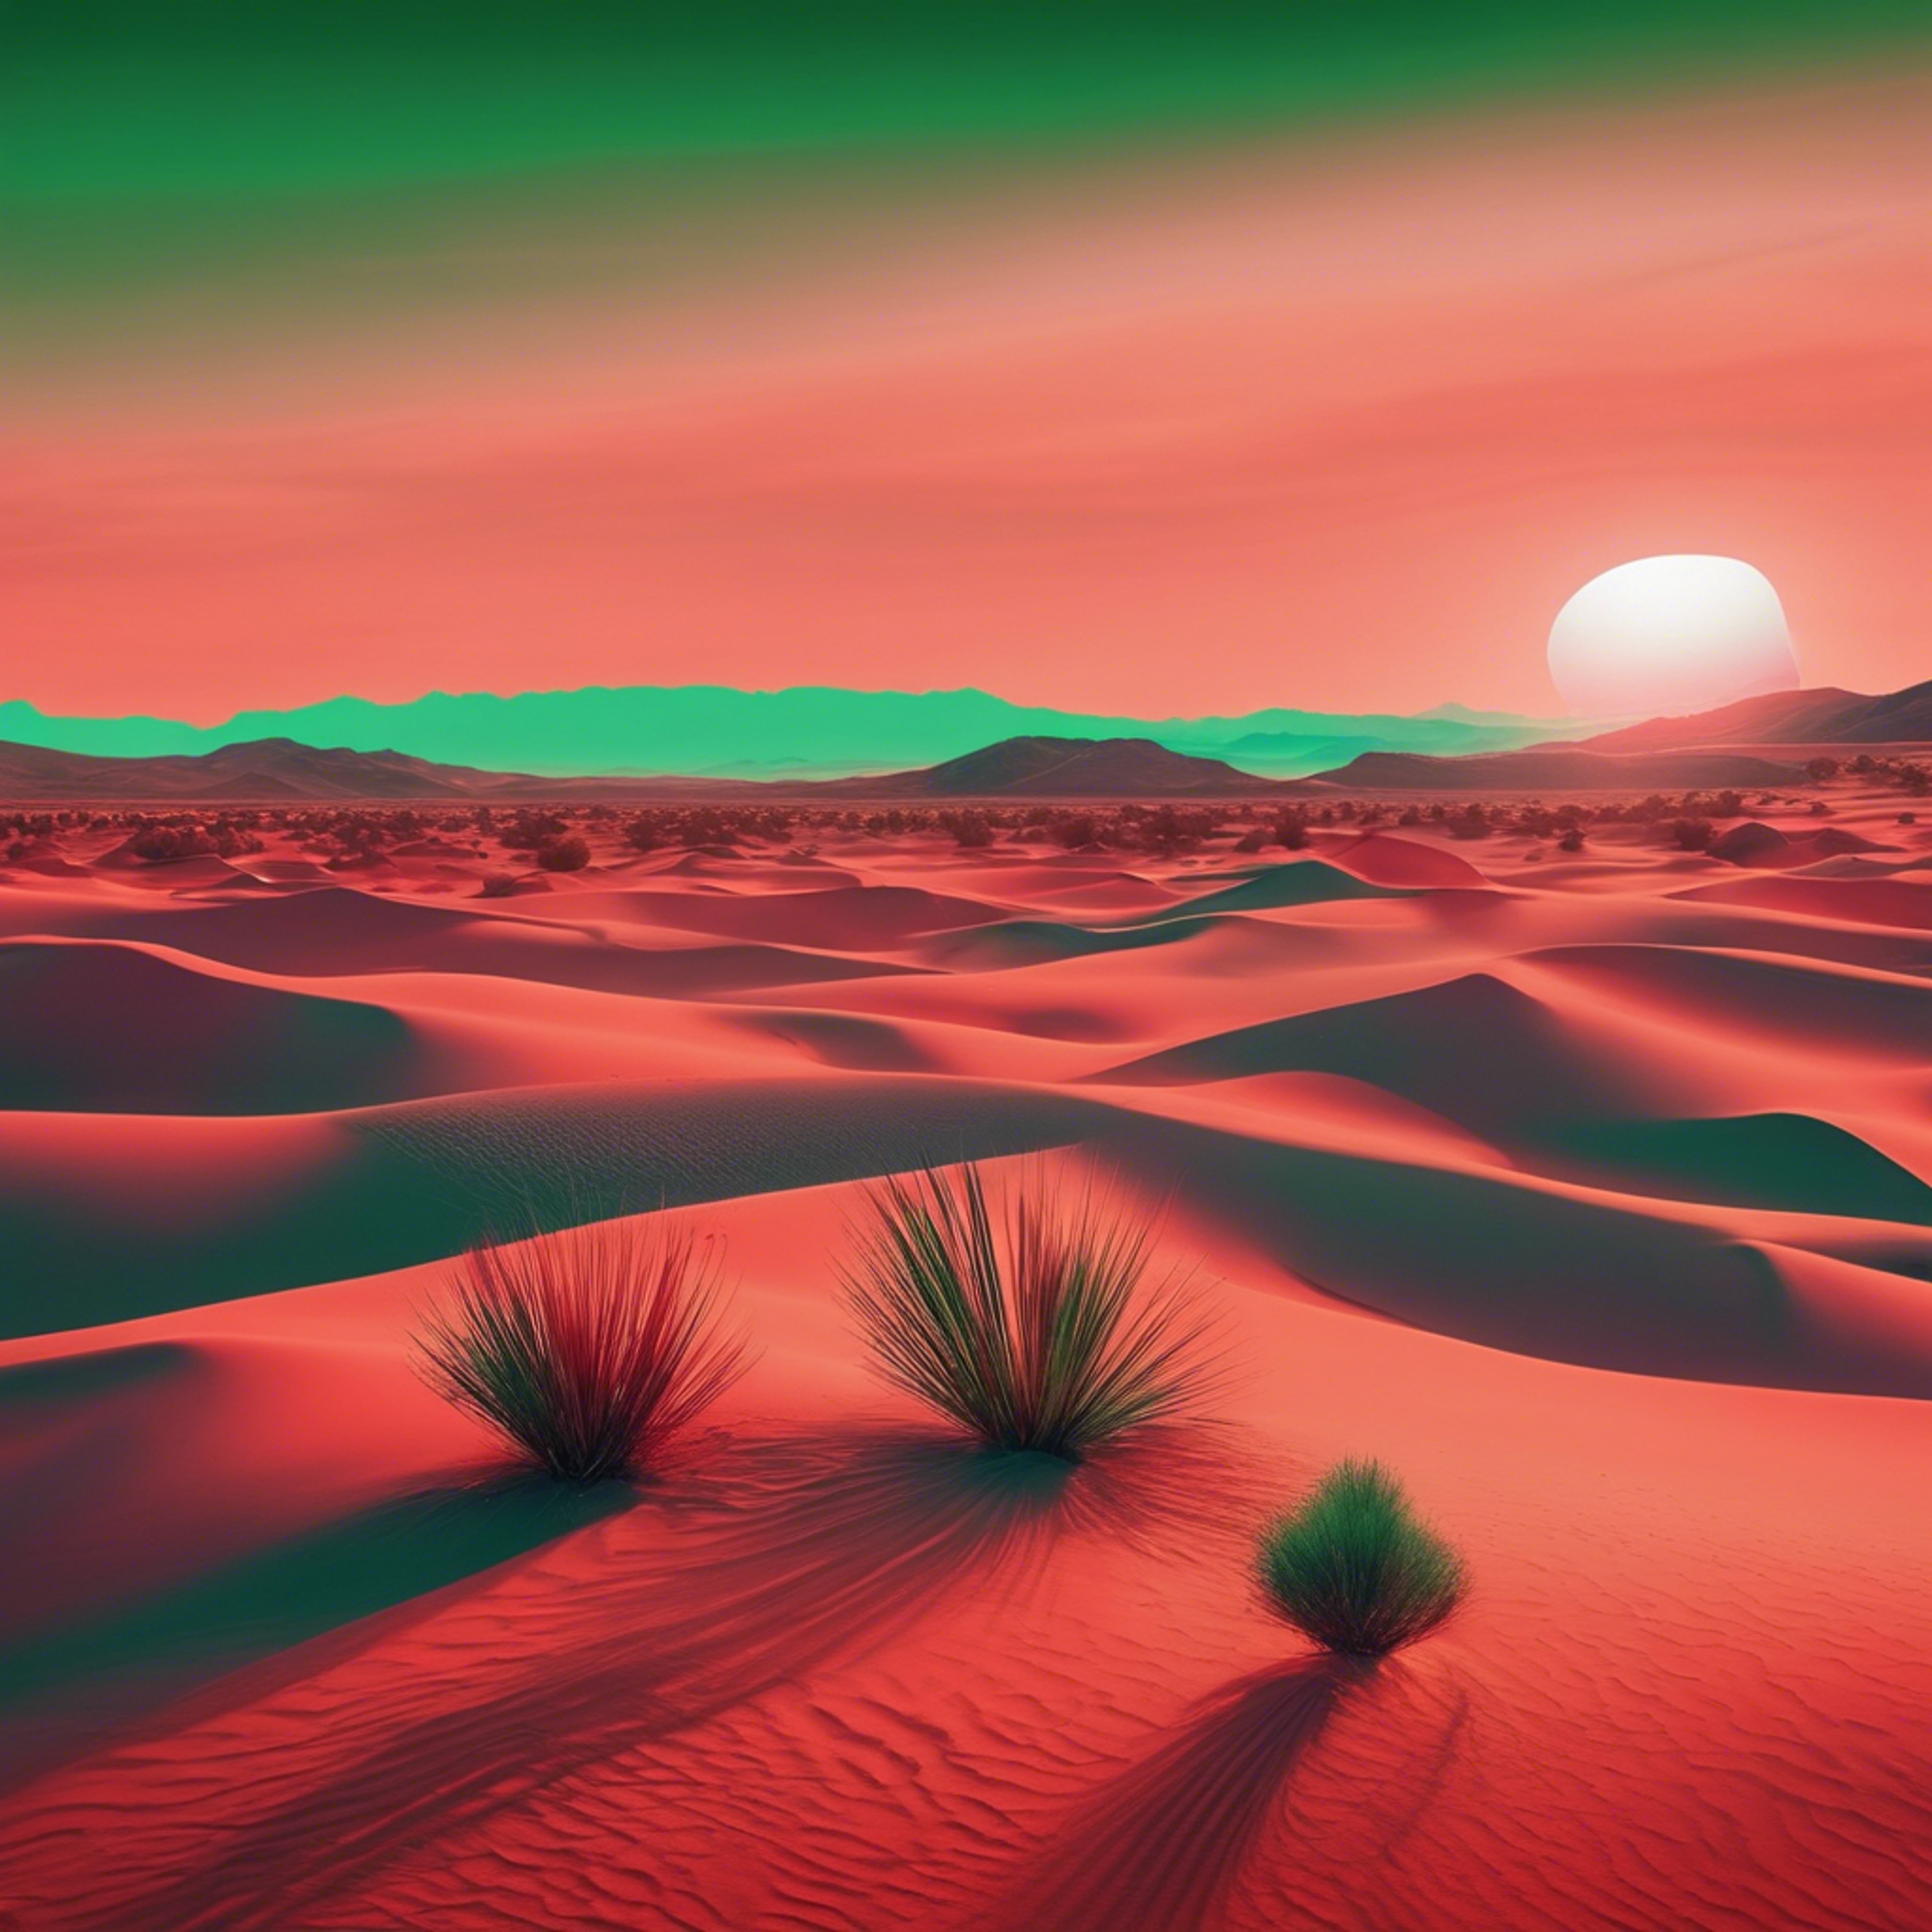 Abstract mirage in red and green, reminiscent of a modern artist's take on a desert sunset Валлпапер[3a4ec3a043b54638a7ad]